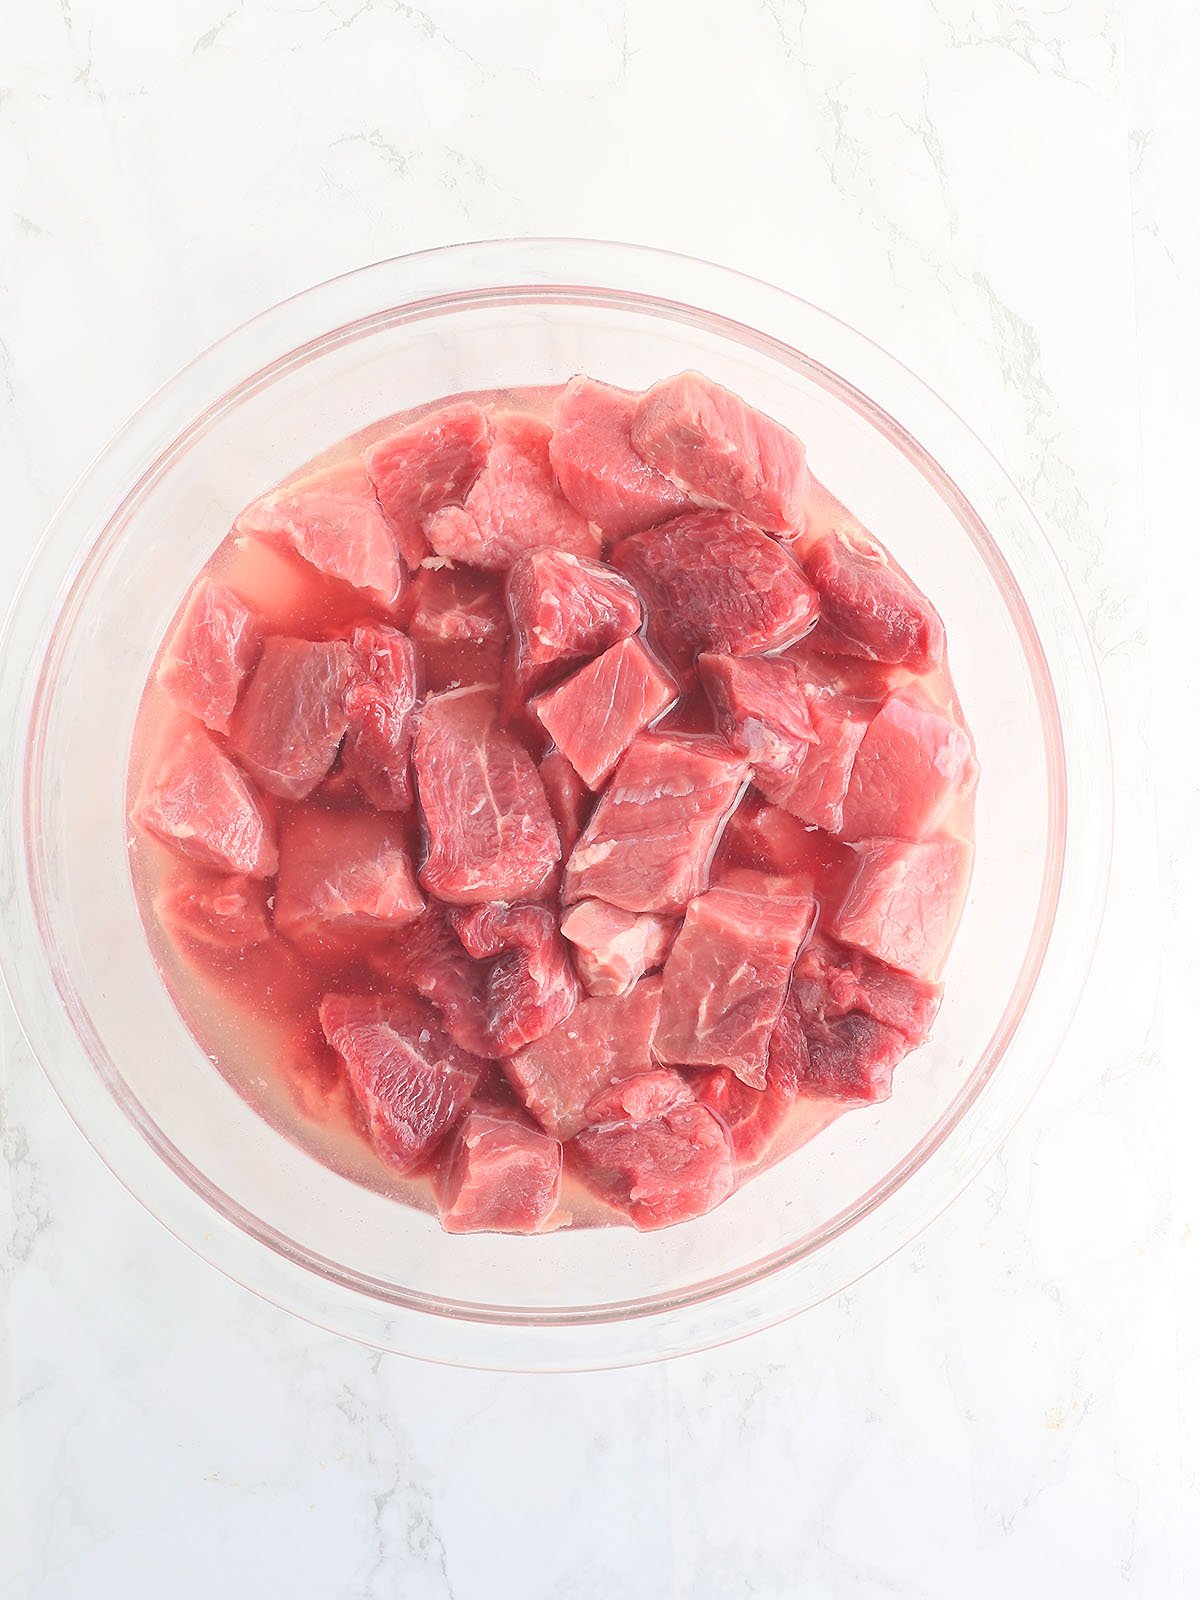 Steak tips soaking in a mixture of water and baking soda.